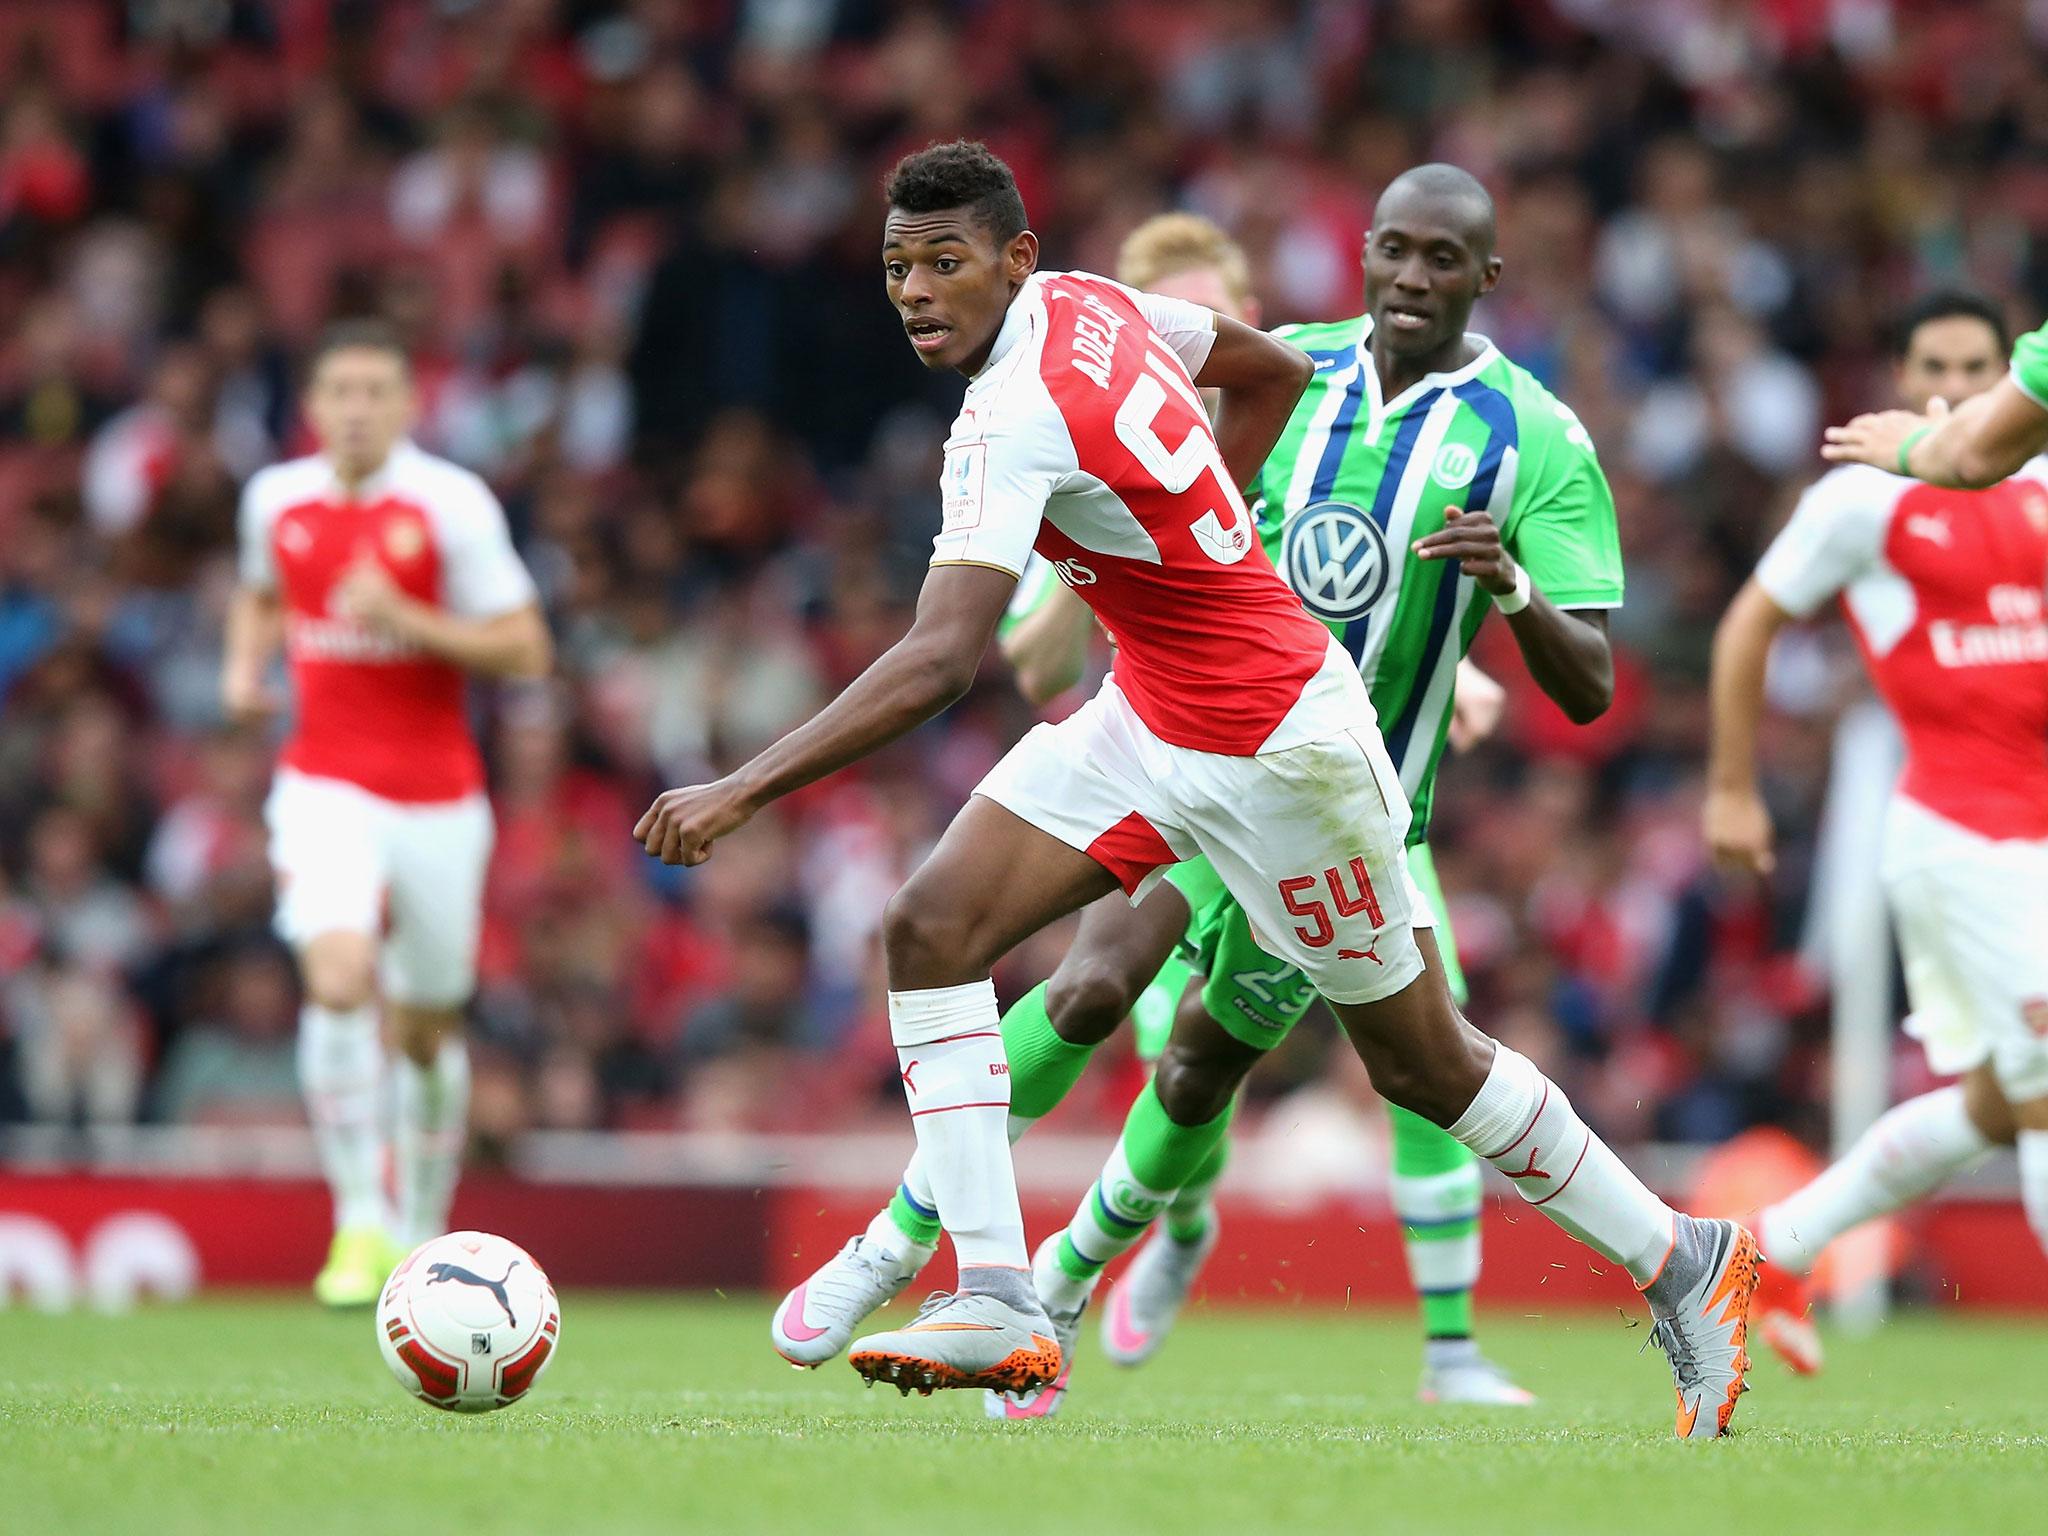 Jeff Reine-Adelaide is one of the prospects among Arsenal's younger players